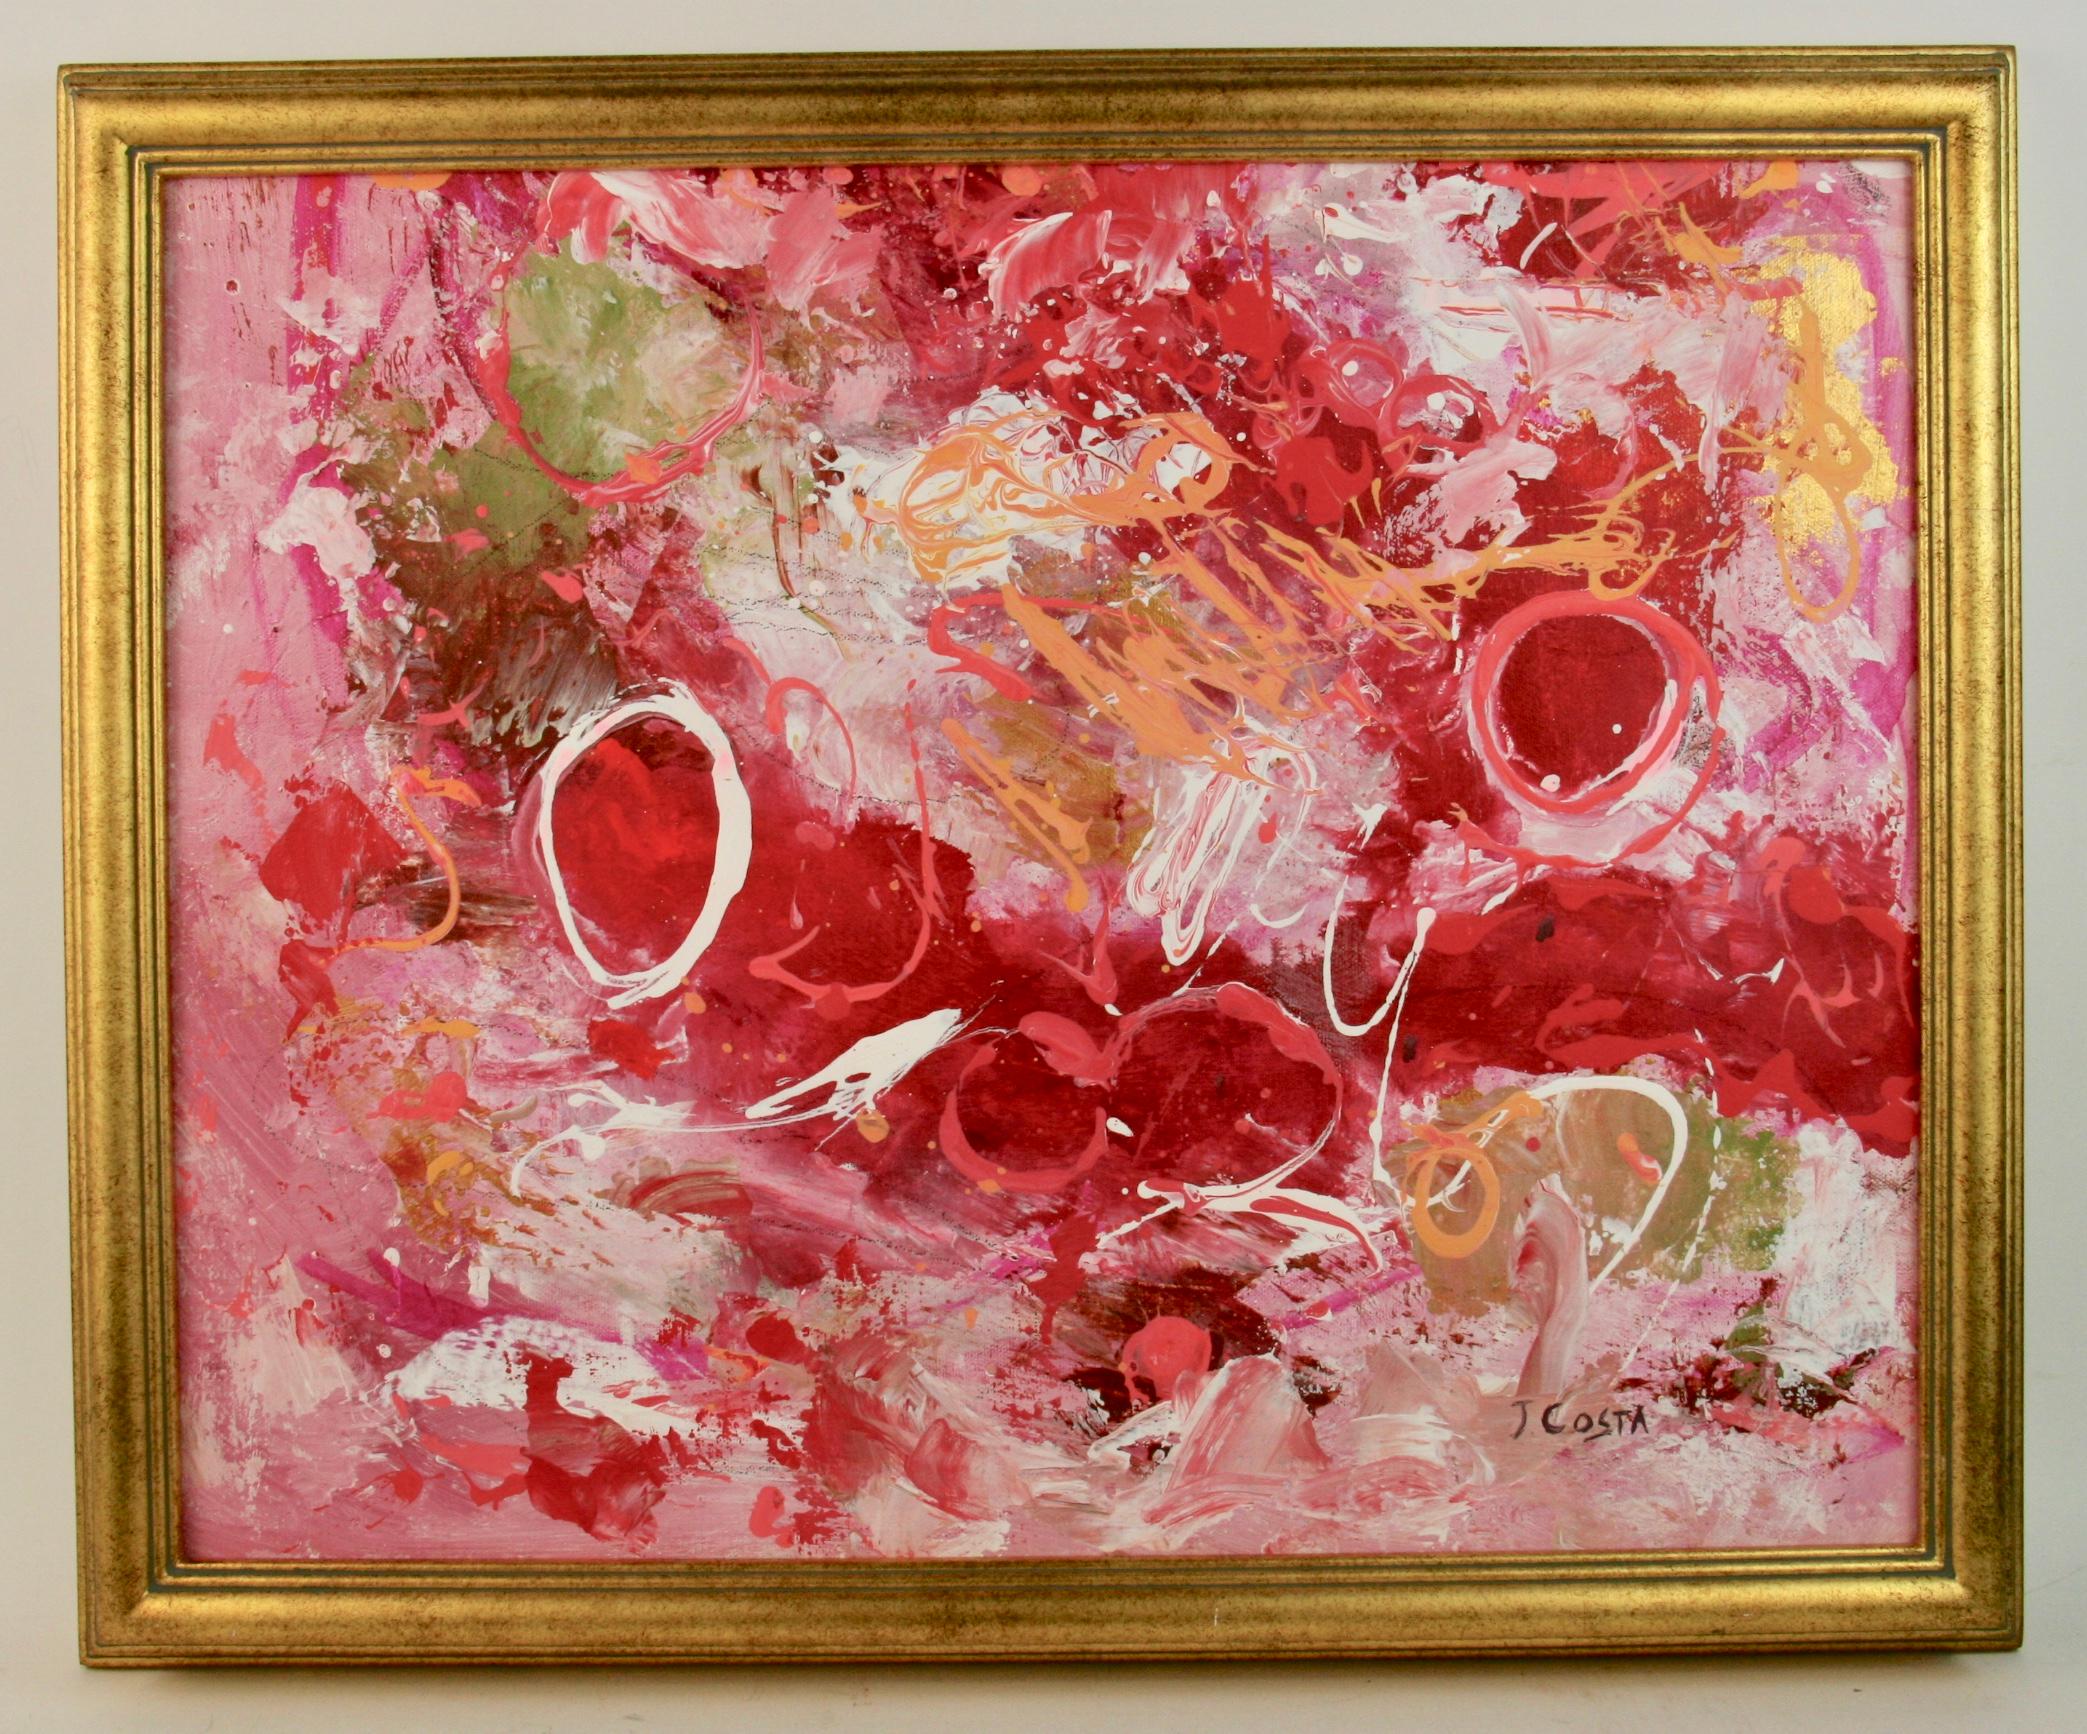 Costa Abstract Painting – Vintage Italienisch Abstrakt Expressionist Flaming Red Heart Gemälde 1970